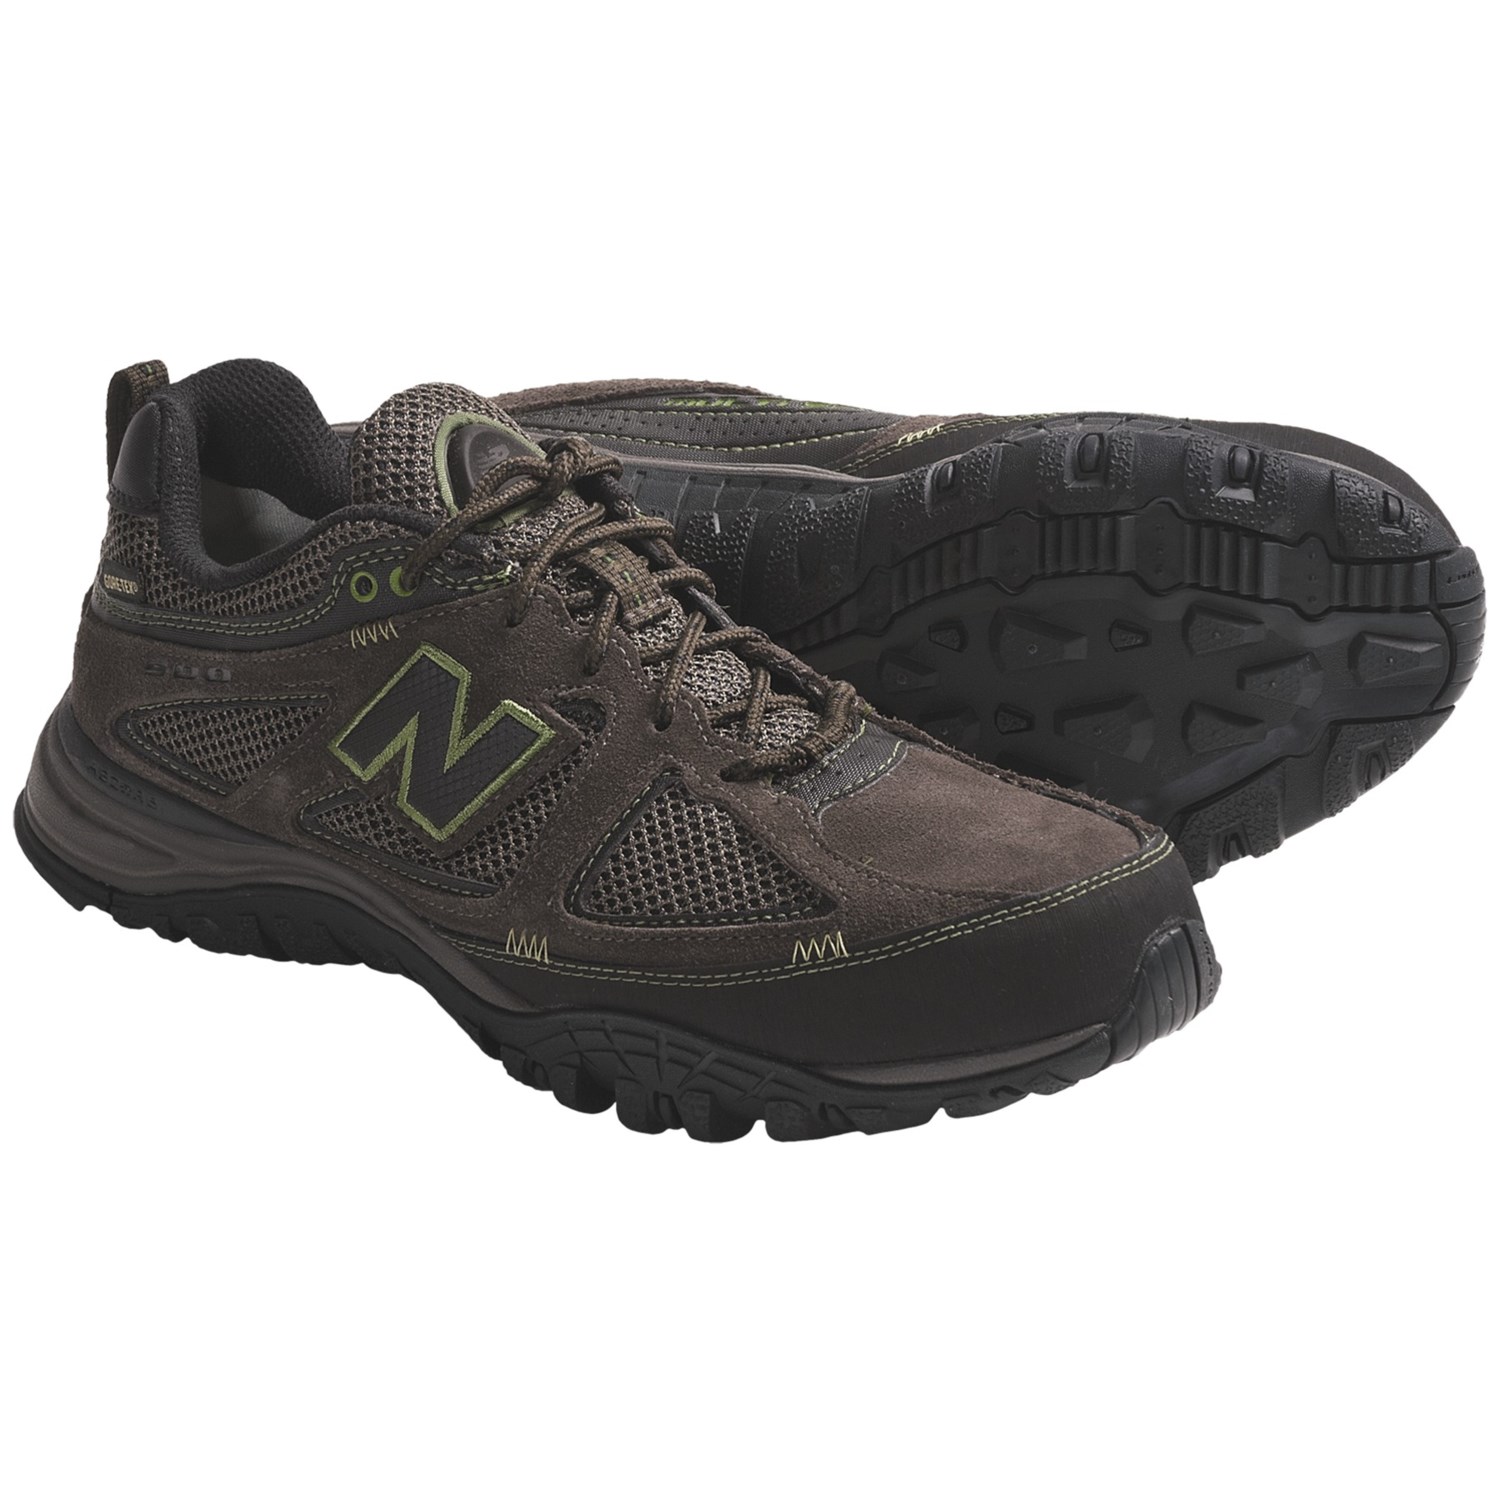 New Balance MO900 Gore-Tex® Trail Shoes (For Men) 4827G - Save 36%